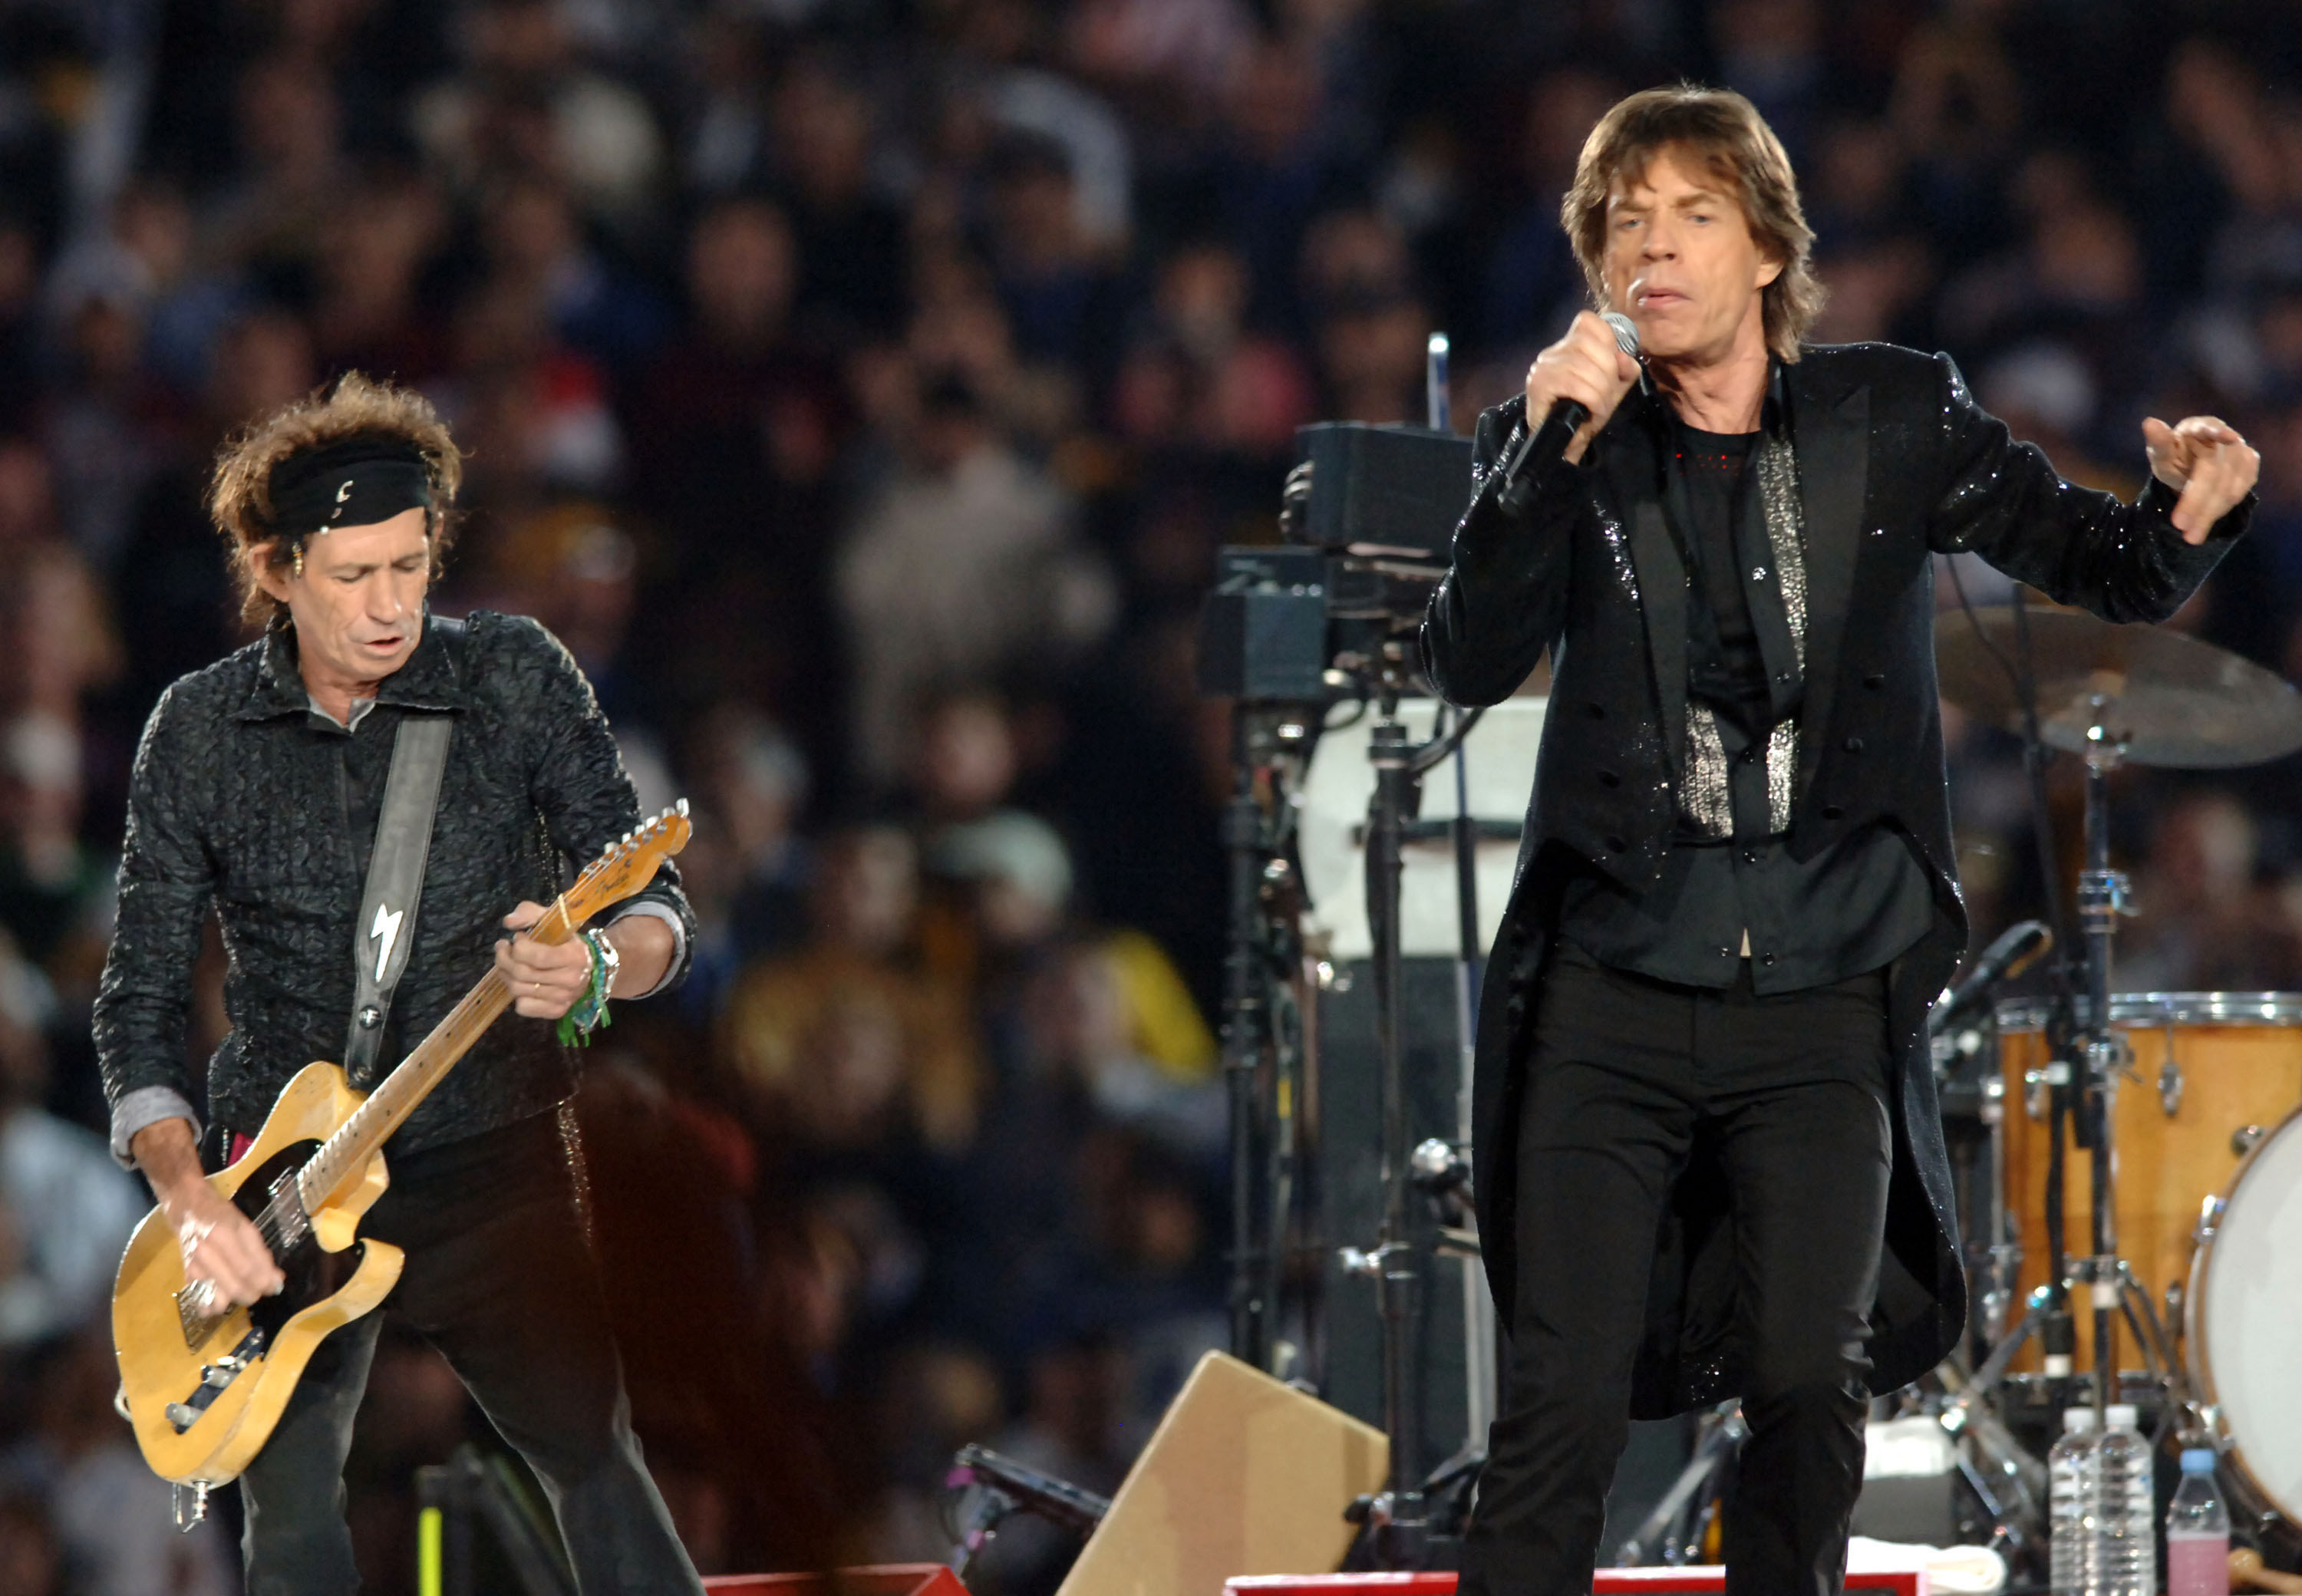 Keith Richards and Mick Jagger of The Rolling Stones perform at halftime during Super Bowl XL